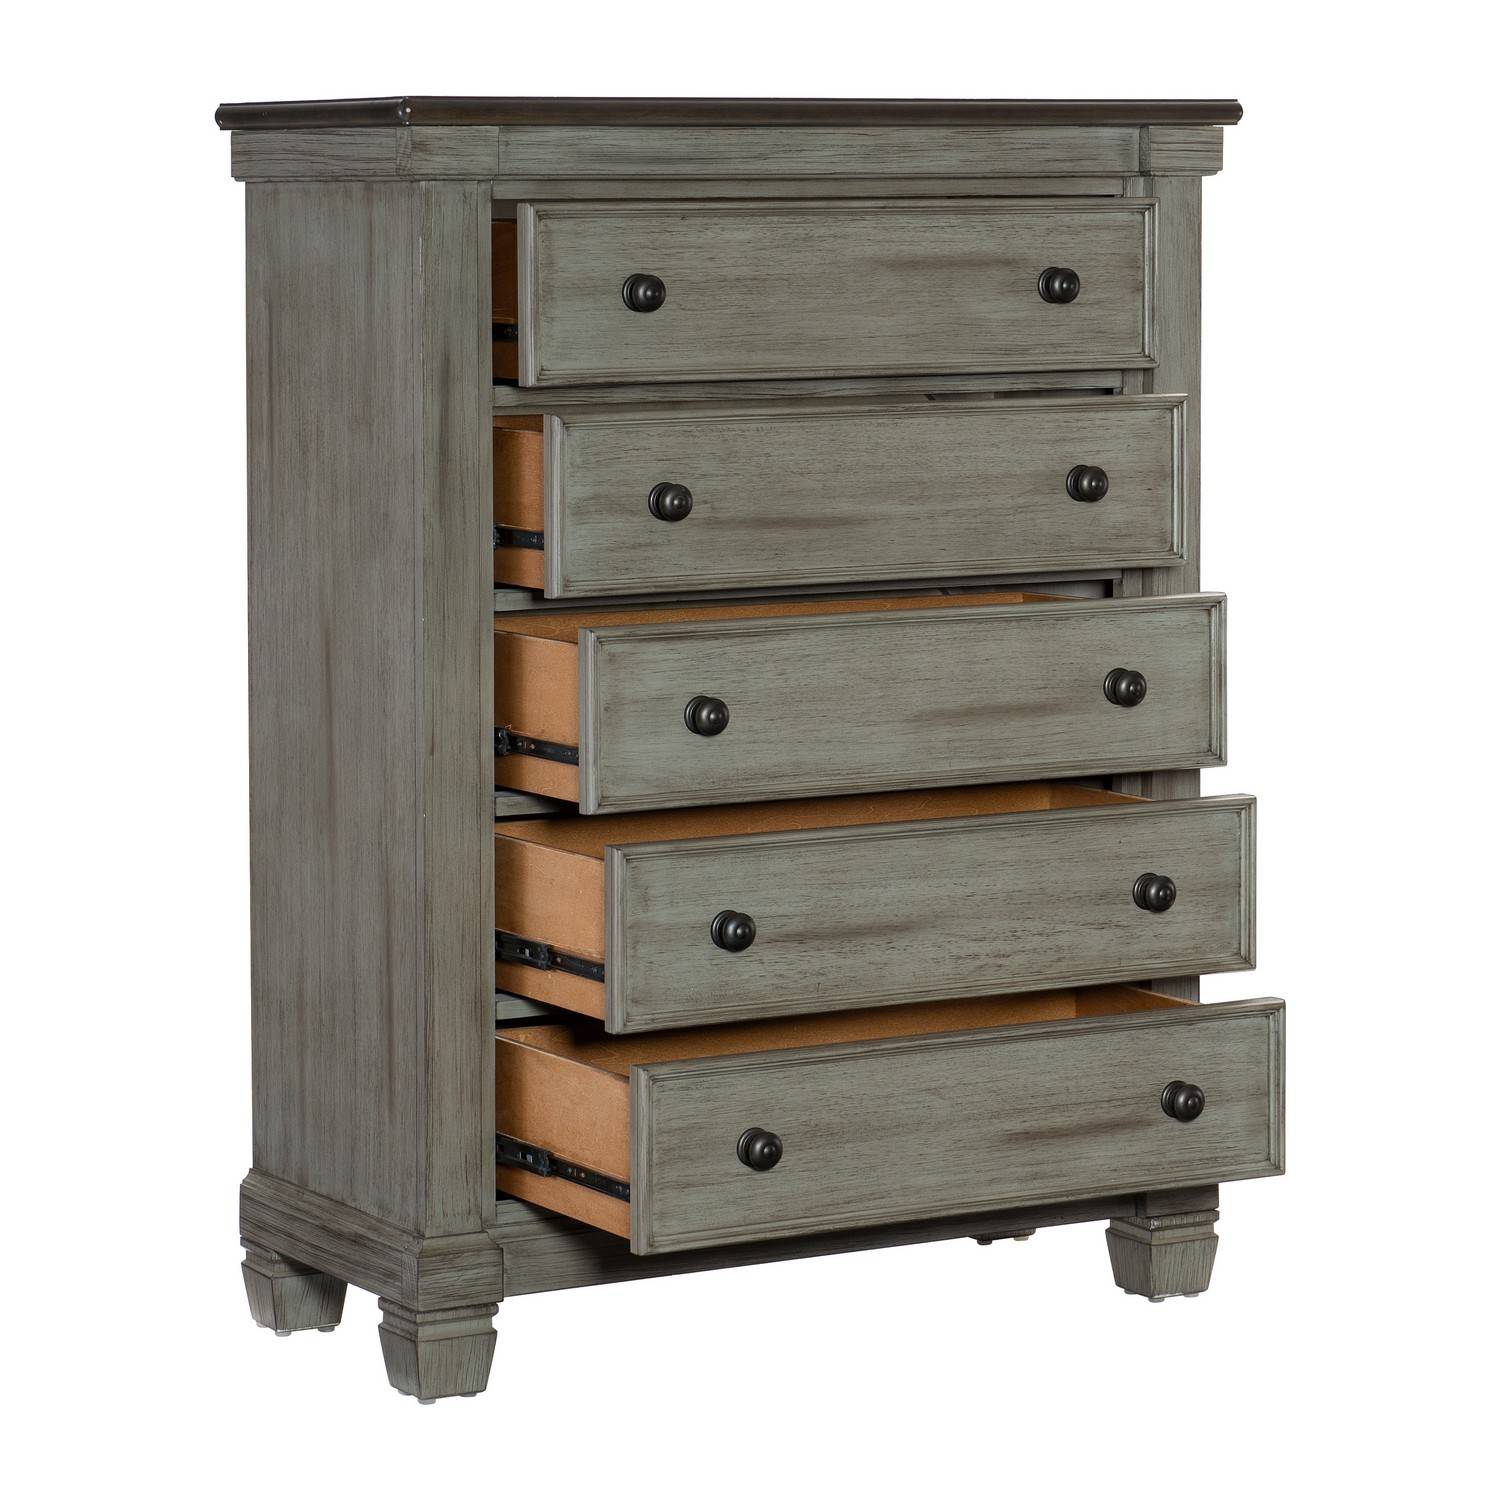 Homelegance Weaver Chest - Two-tone : Antique Gray And Coffee